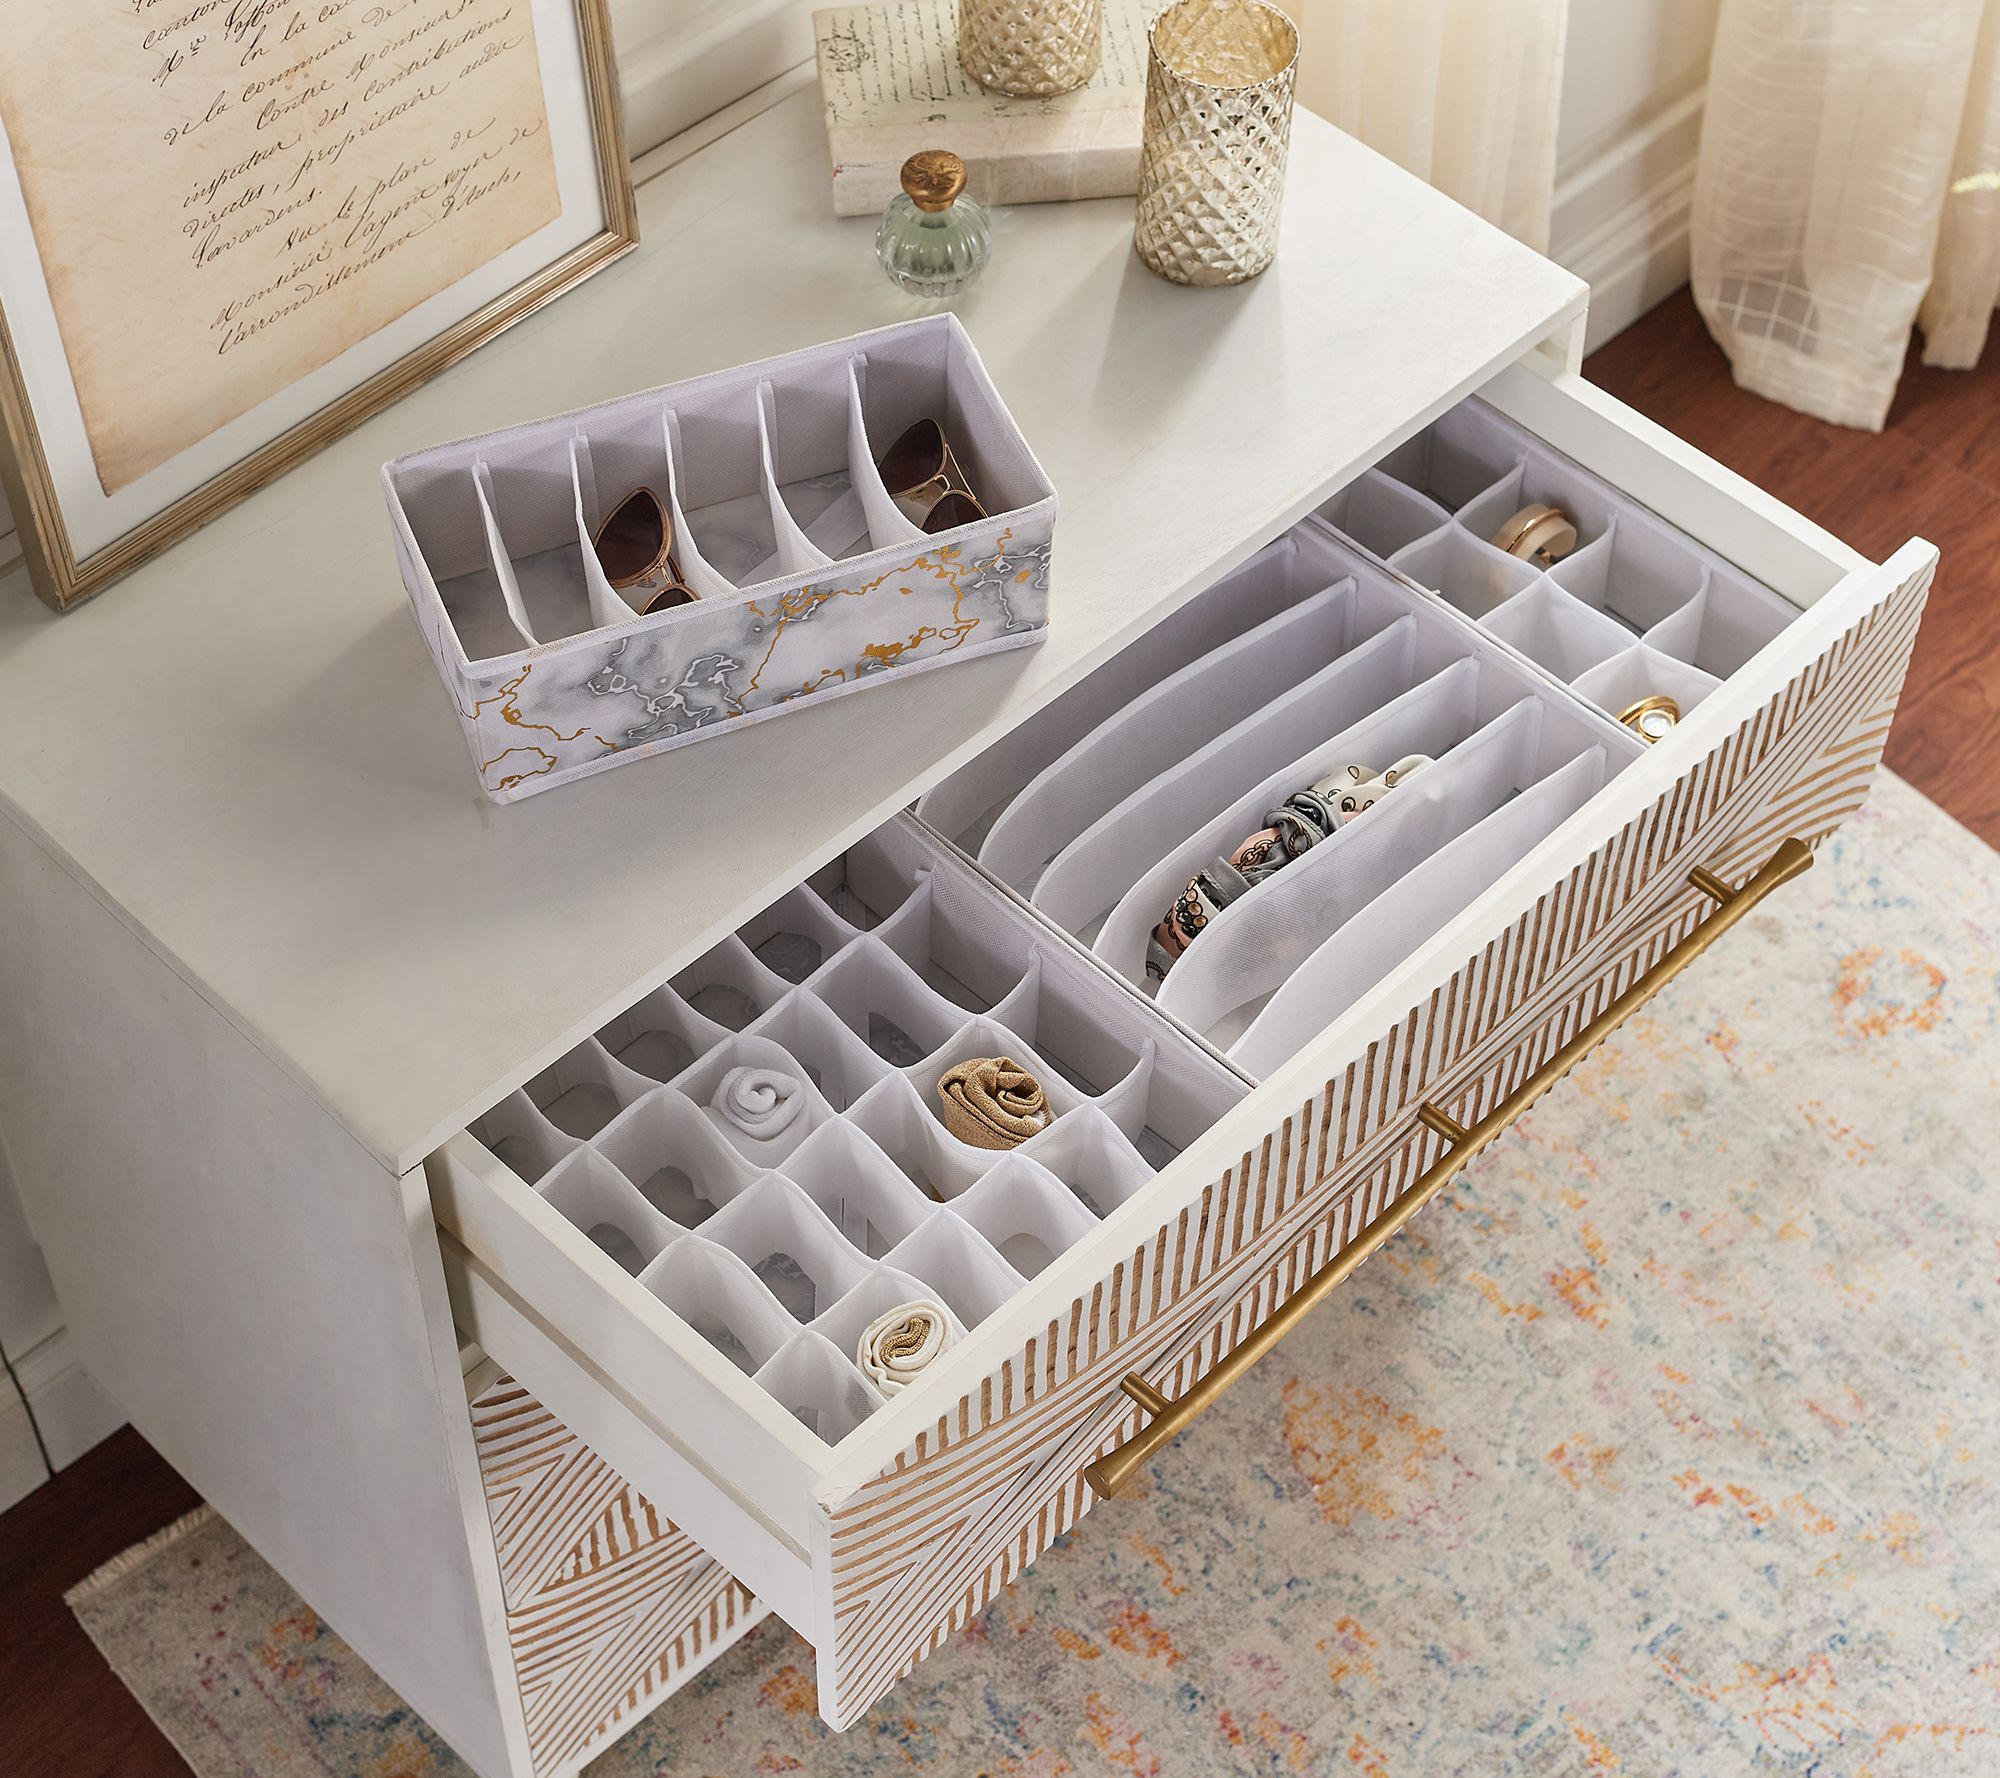 Periea 'Joan' Drawer Organiser – 16 Compartments – Foldable Drawer